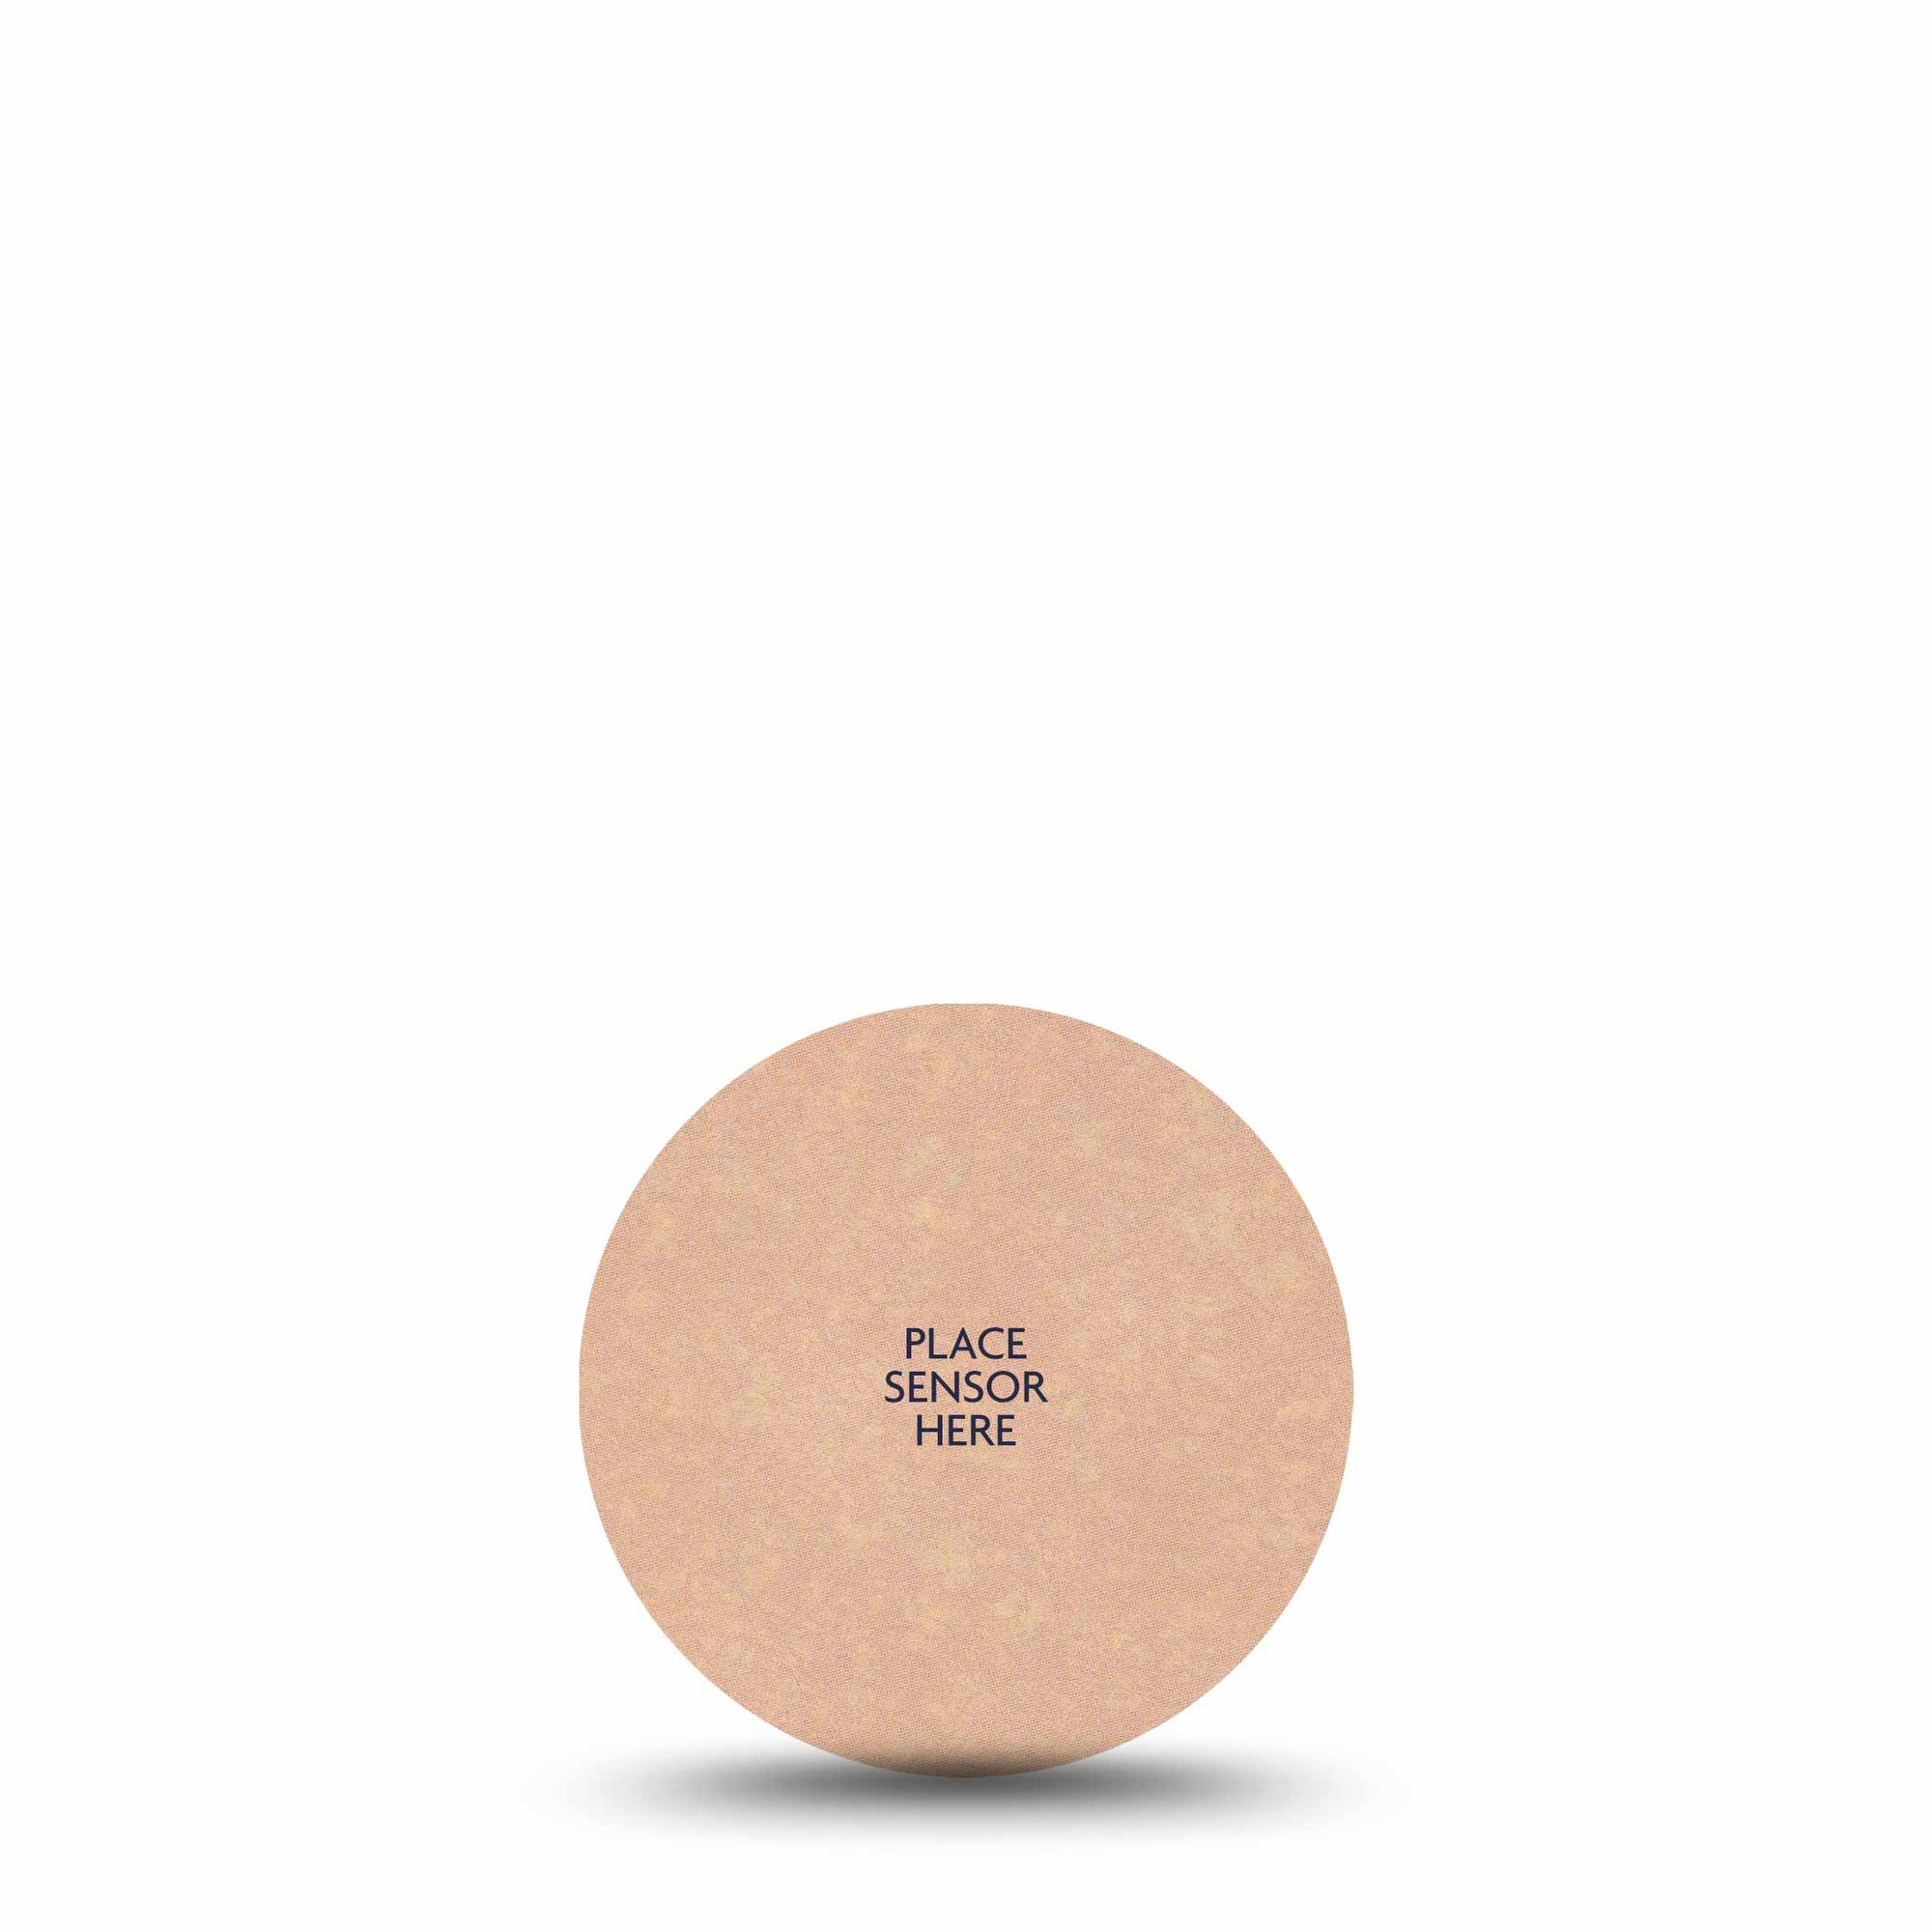 ExpressionMed Skin Tone 06 - Ivory Oval Underpatch